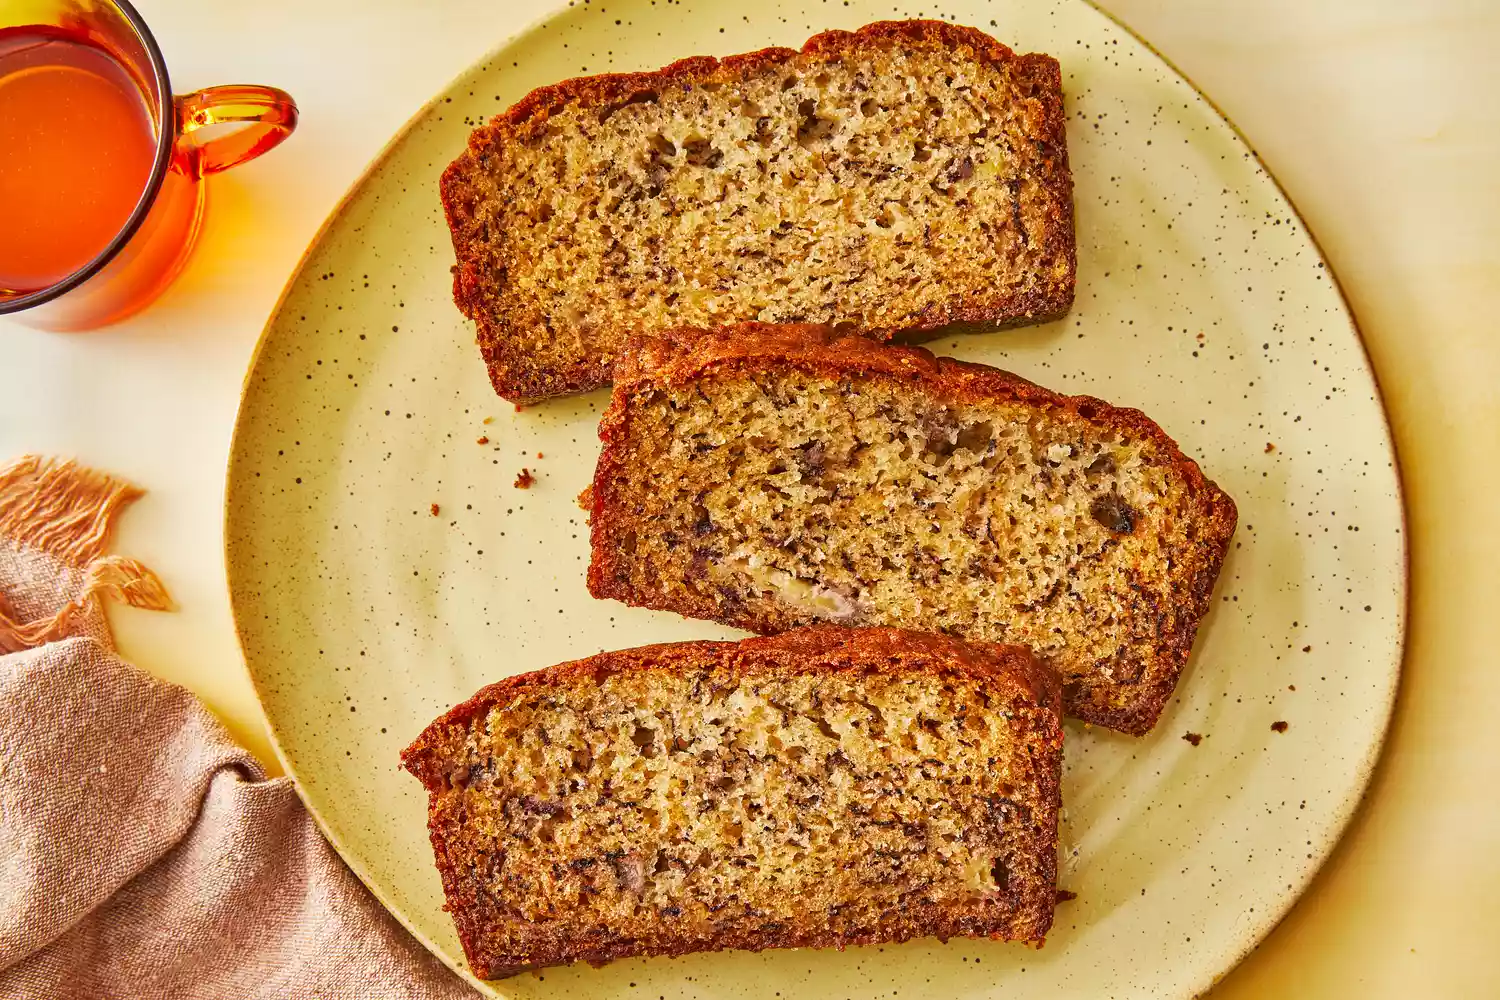 Southern Living One Bowl Banana Bread sliced on a plate to serve with a cup of tea